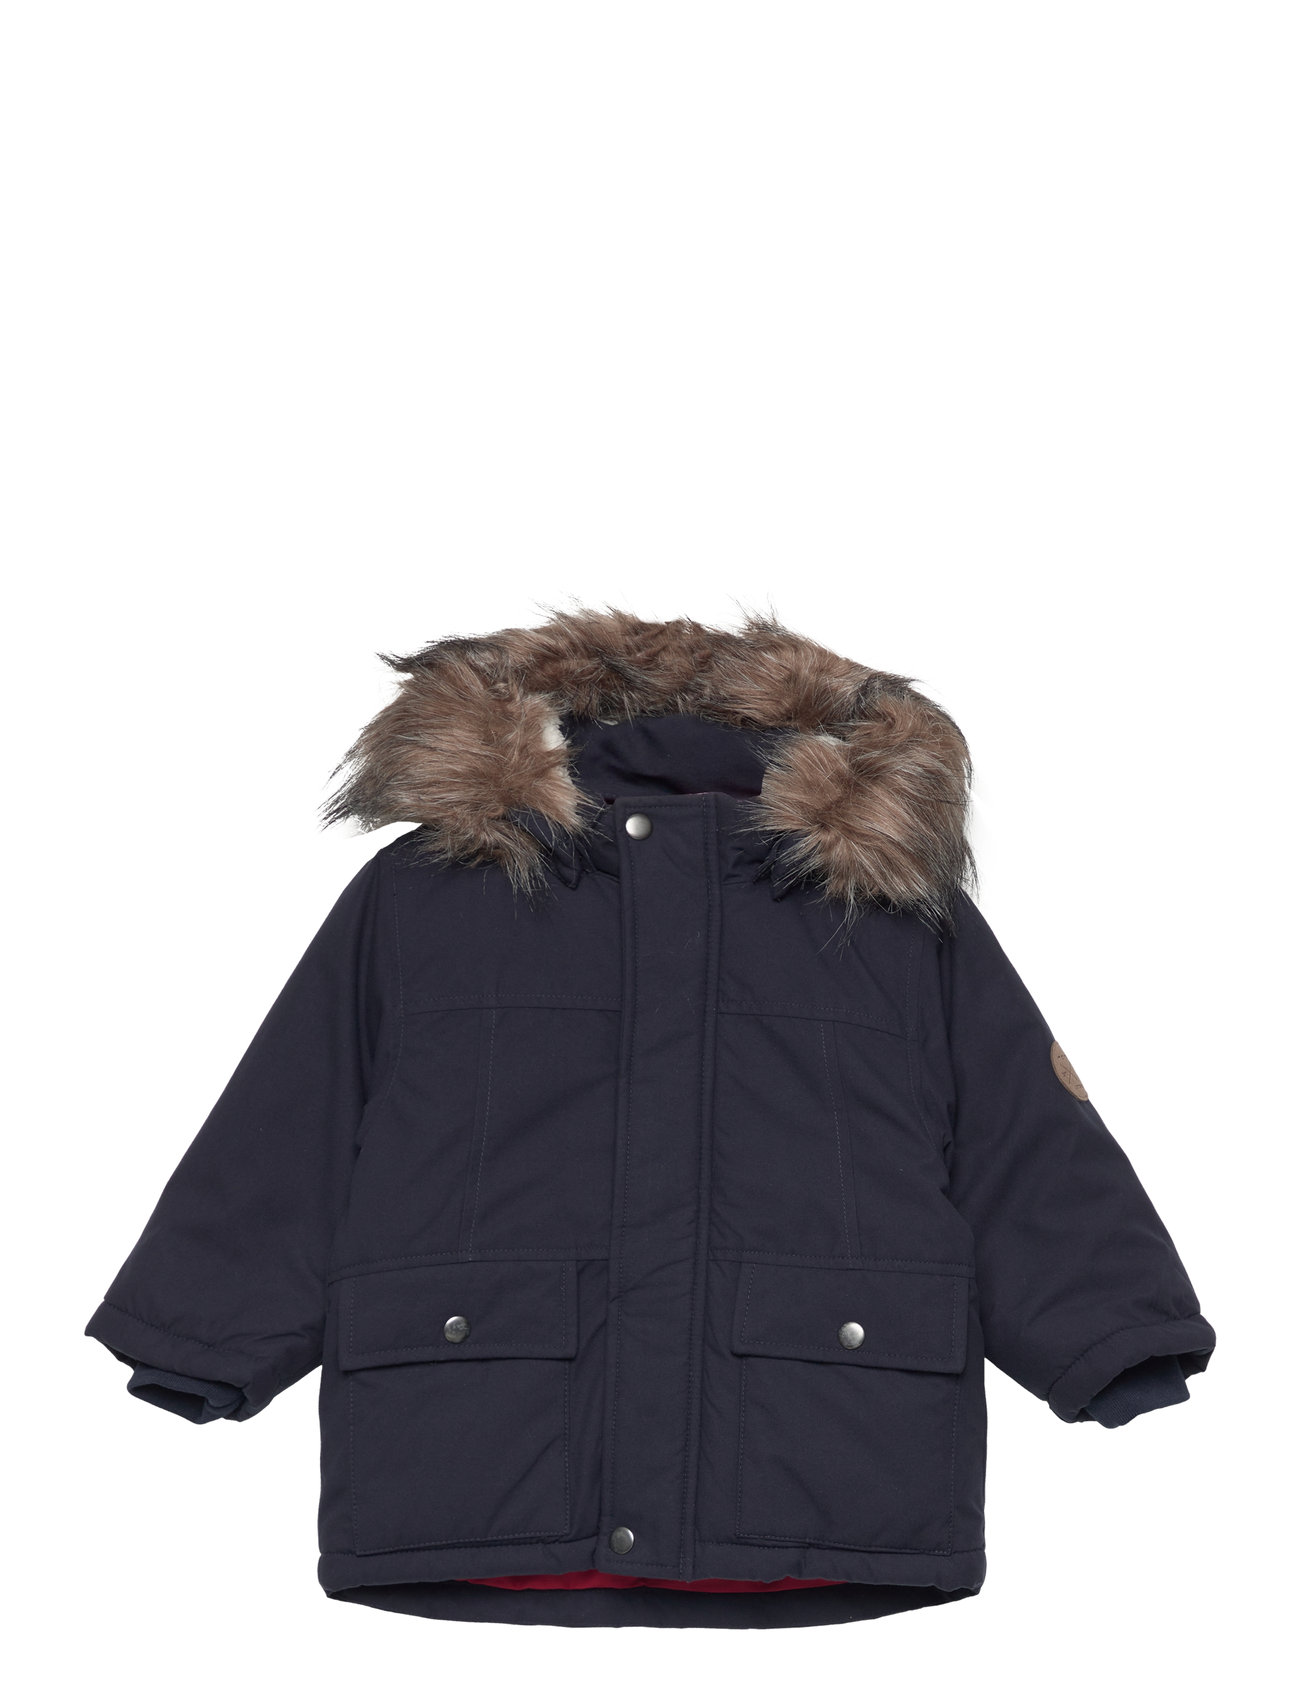 name it Buy Jacket Fo Parka returns Nmmmarlin and from €. - Boozt.com. online at Fast 27.50 Pb it Parkas name delivery easy